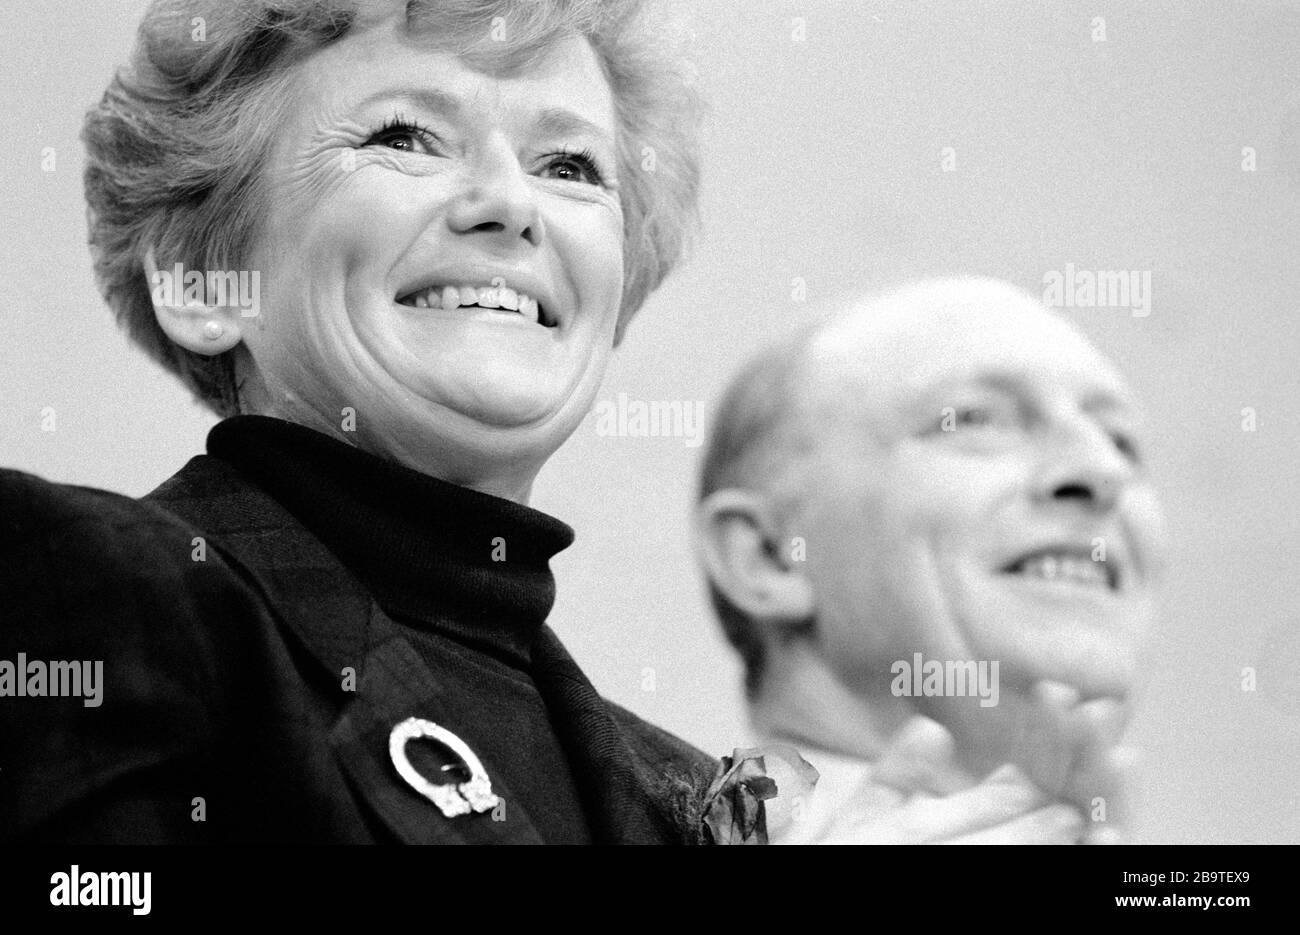 Neil and Glenys Kinnock, former leader of the Labour Party, UK. Stock Photo